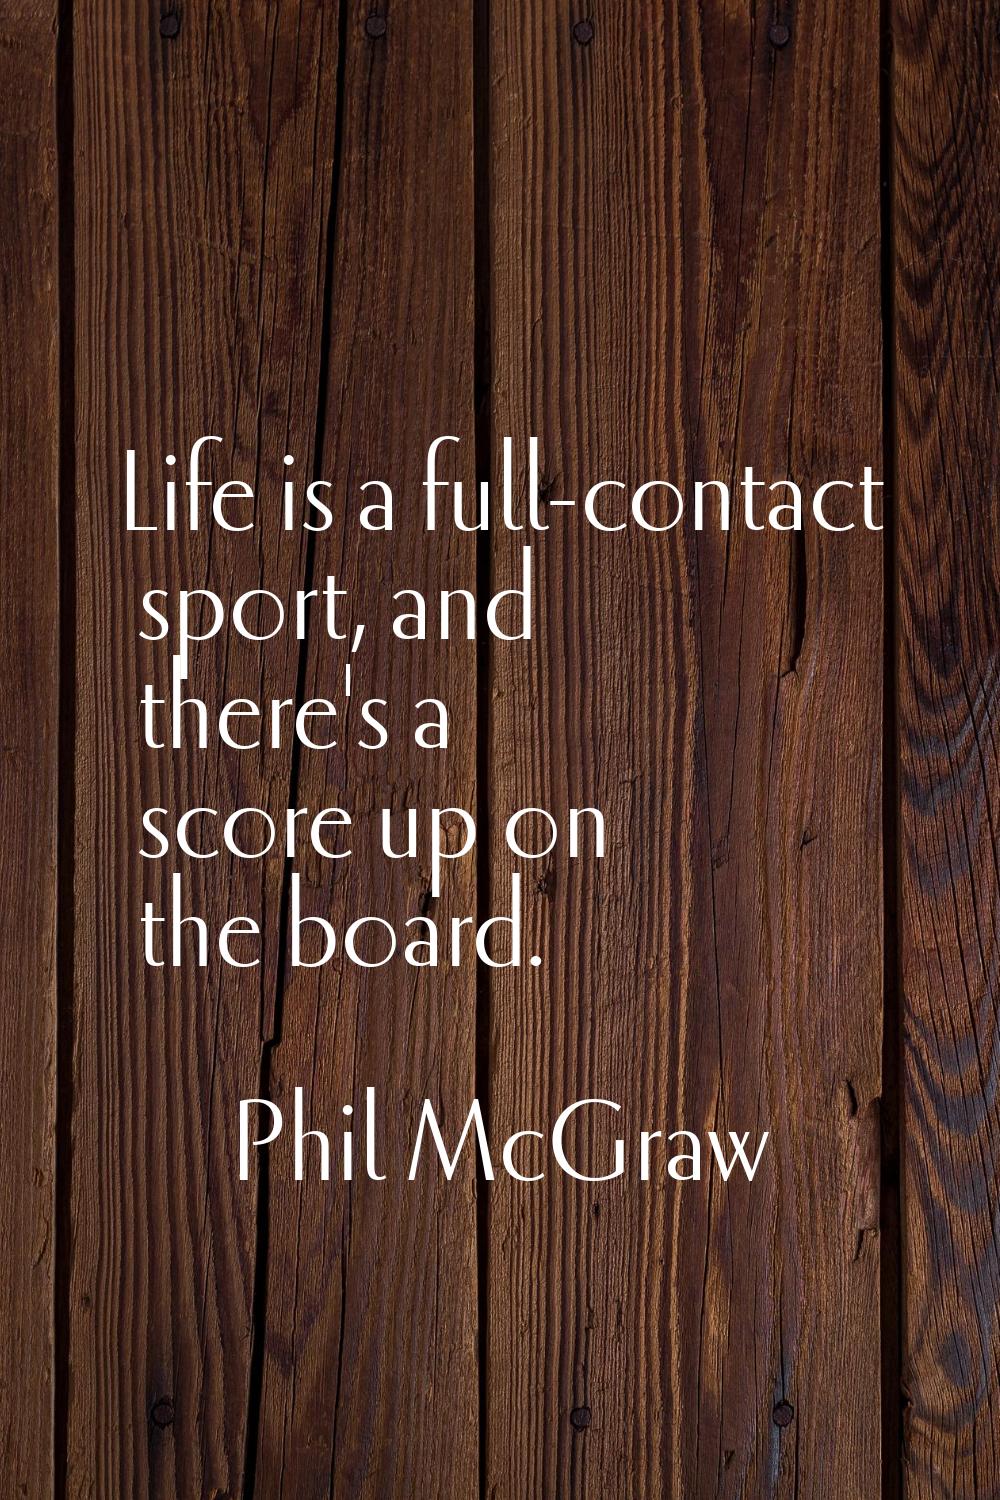 Life is a full-contact sport, and there's a score up on the board.